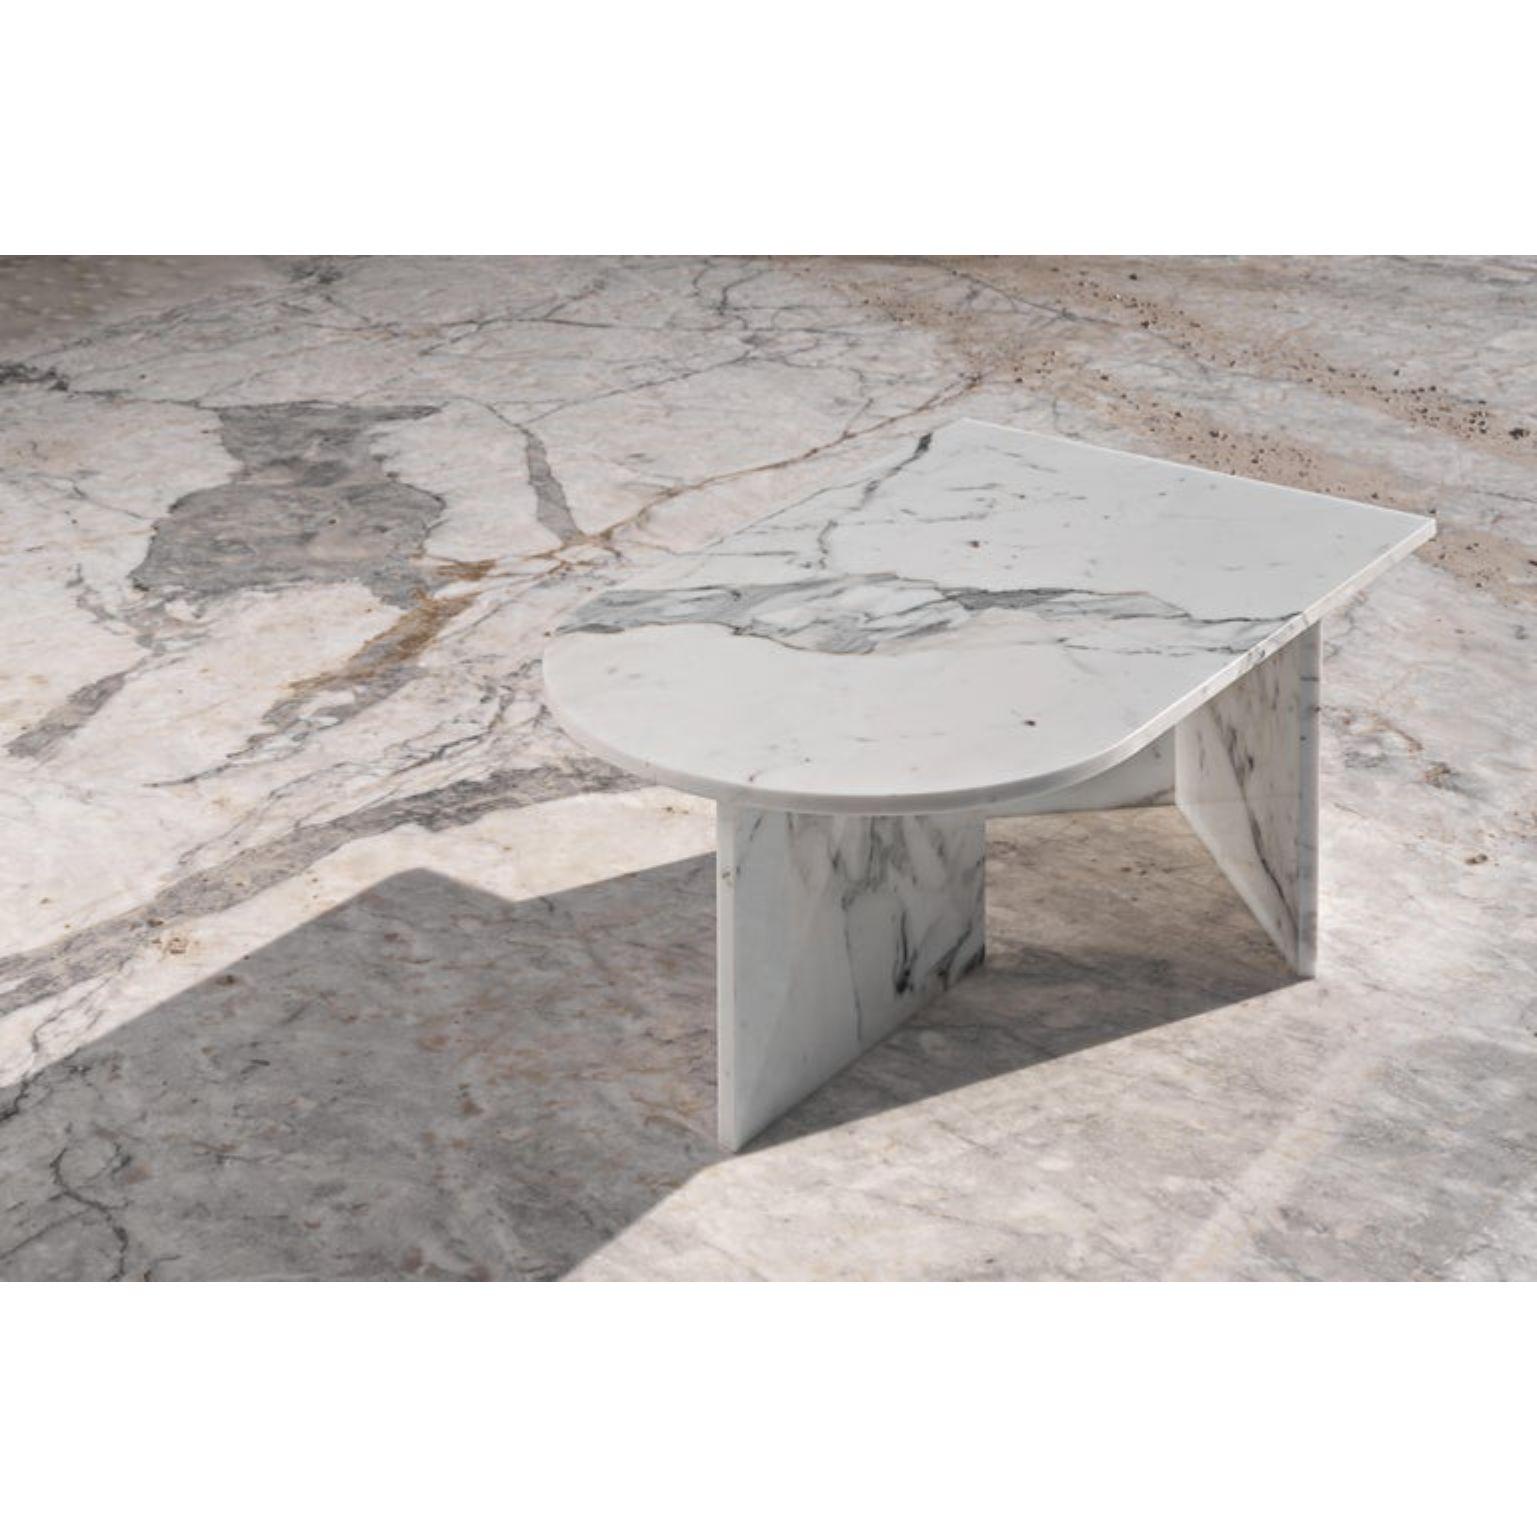 Bas marble coffee table by Edition Club
Edition 6 of 6
Dimensions: L 90 x W 55 x H 40 cm
Materials: Features Arabascato marble direct from the hills of Carrara
65 kgs

Arabascato marble direct from the hills of Carrara, Italy with its distinctive